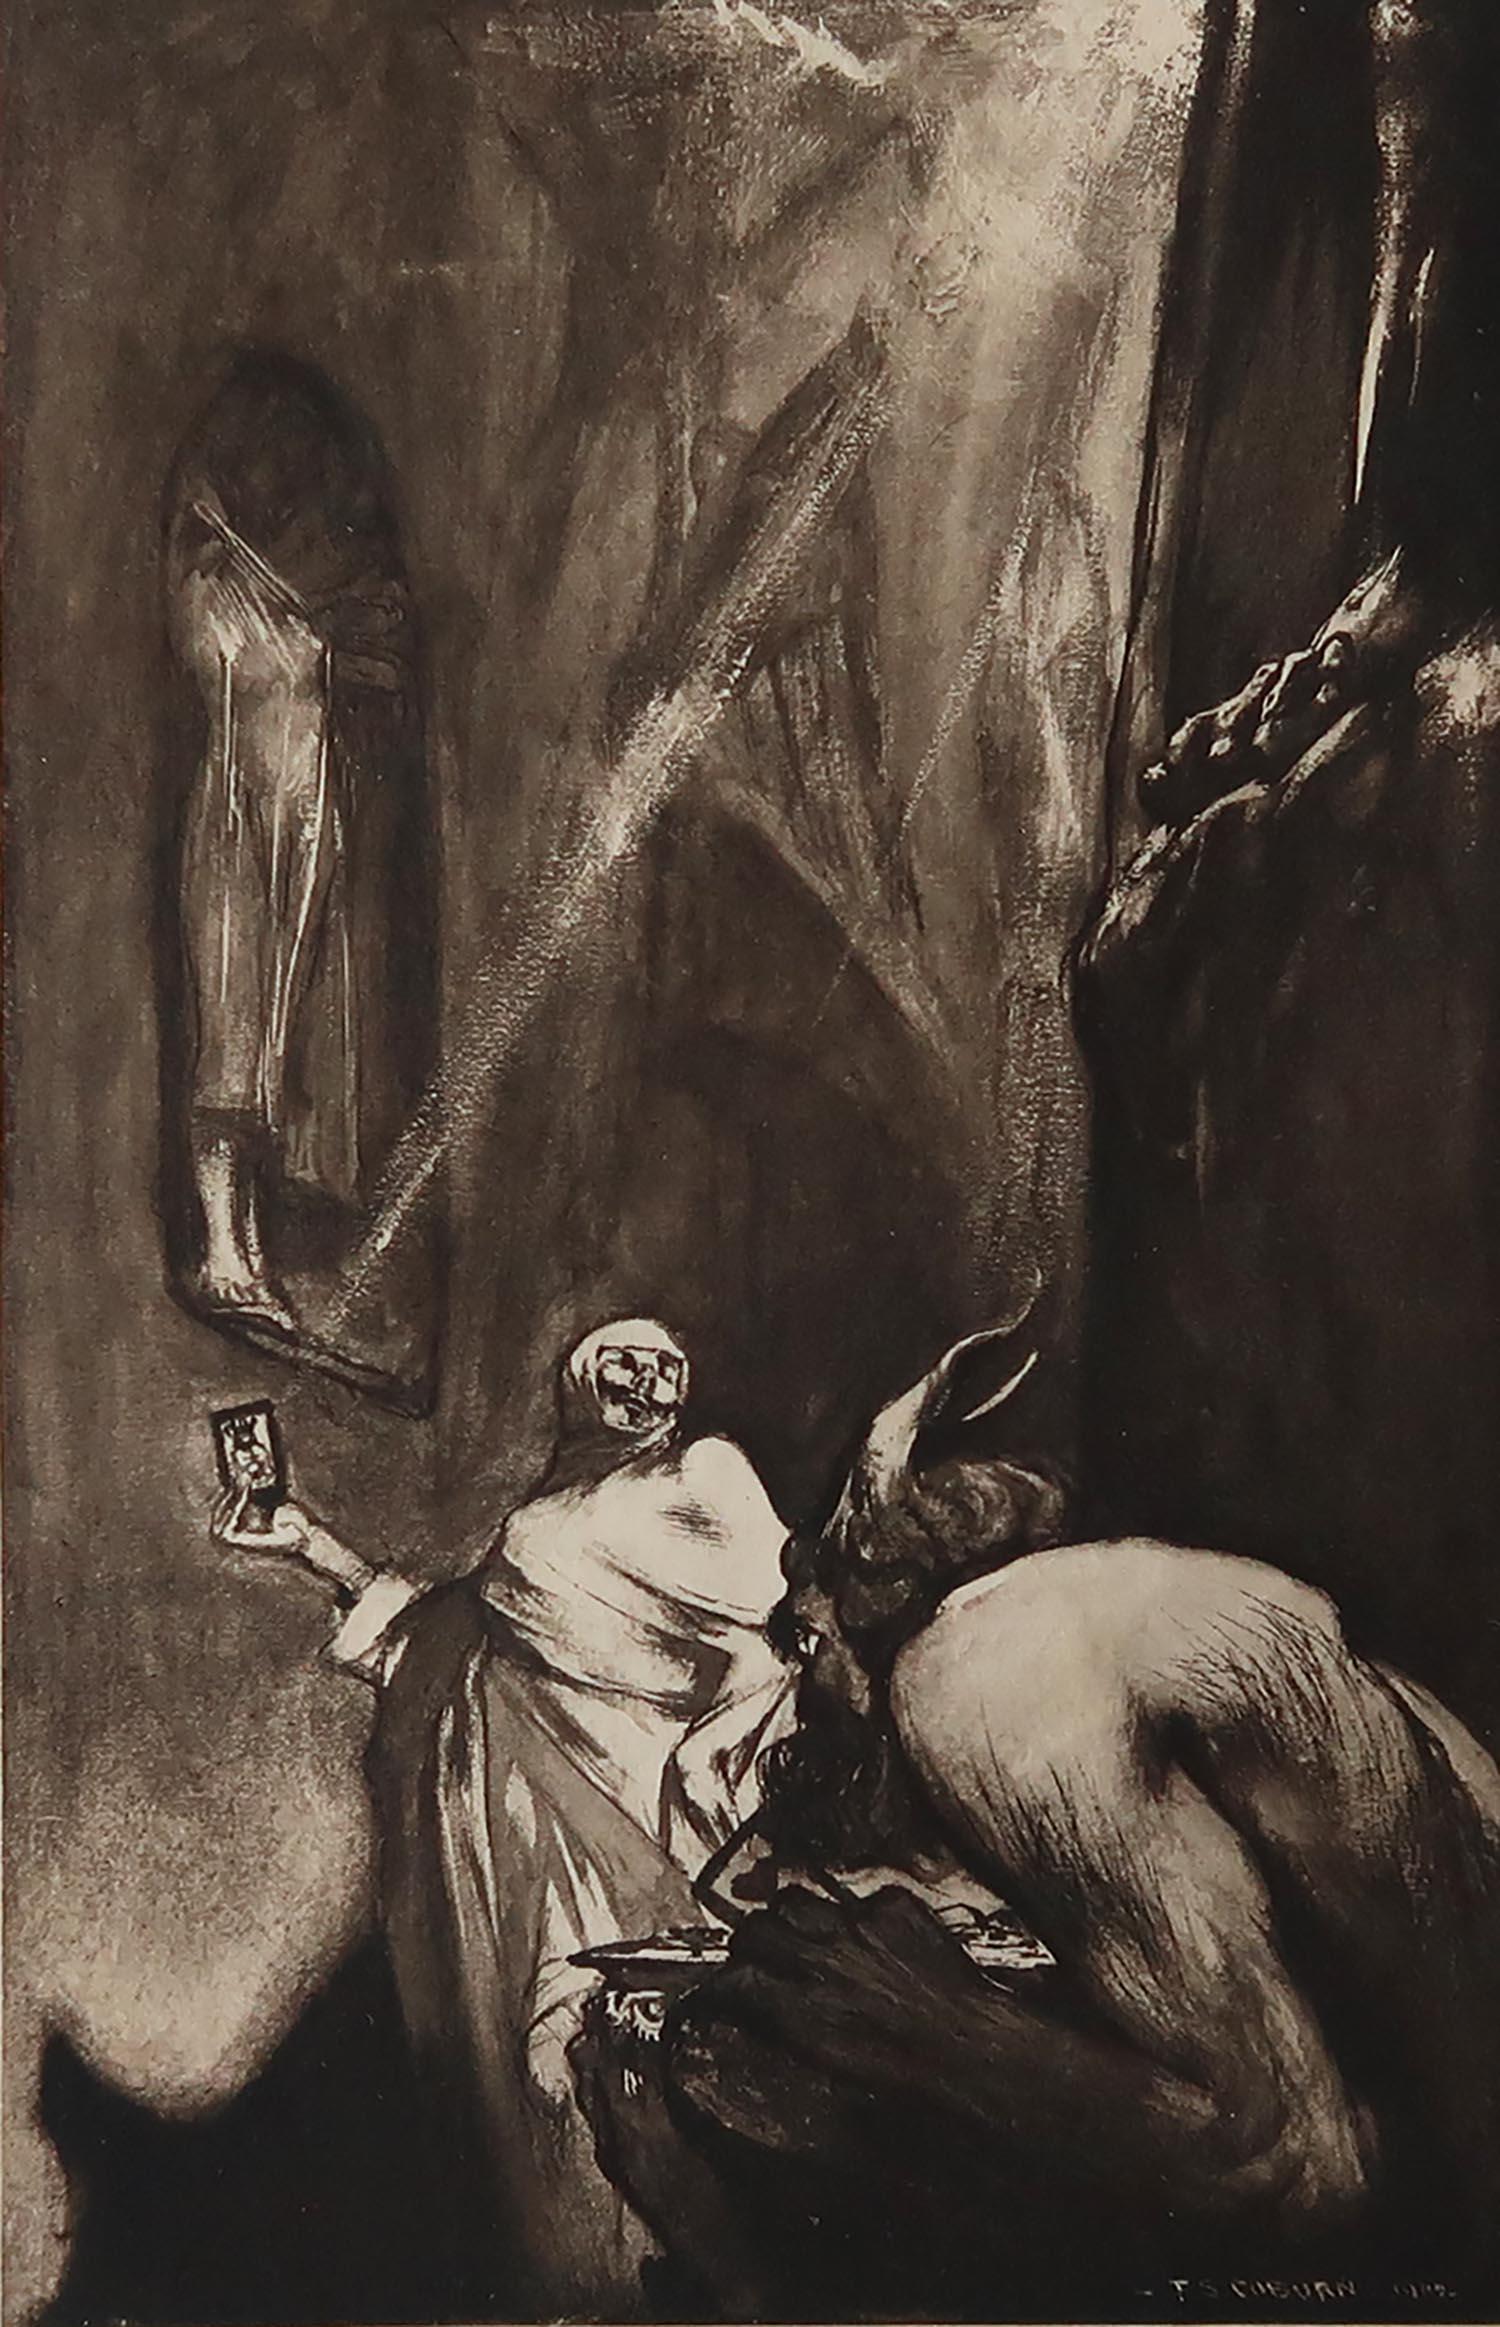 Sensational image by Frederick Simpson Coburn.

In the style of one of my favourite artists, Goya.

Photogravure.

Limited edition of 300. This is No. 84.

From The Complete Works of Edgar Allen Poe.

Published by Putnam, New York. 1902.

On hand